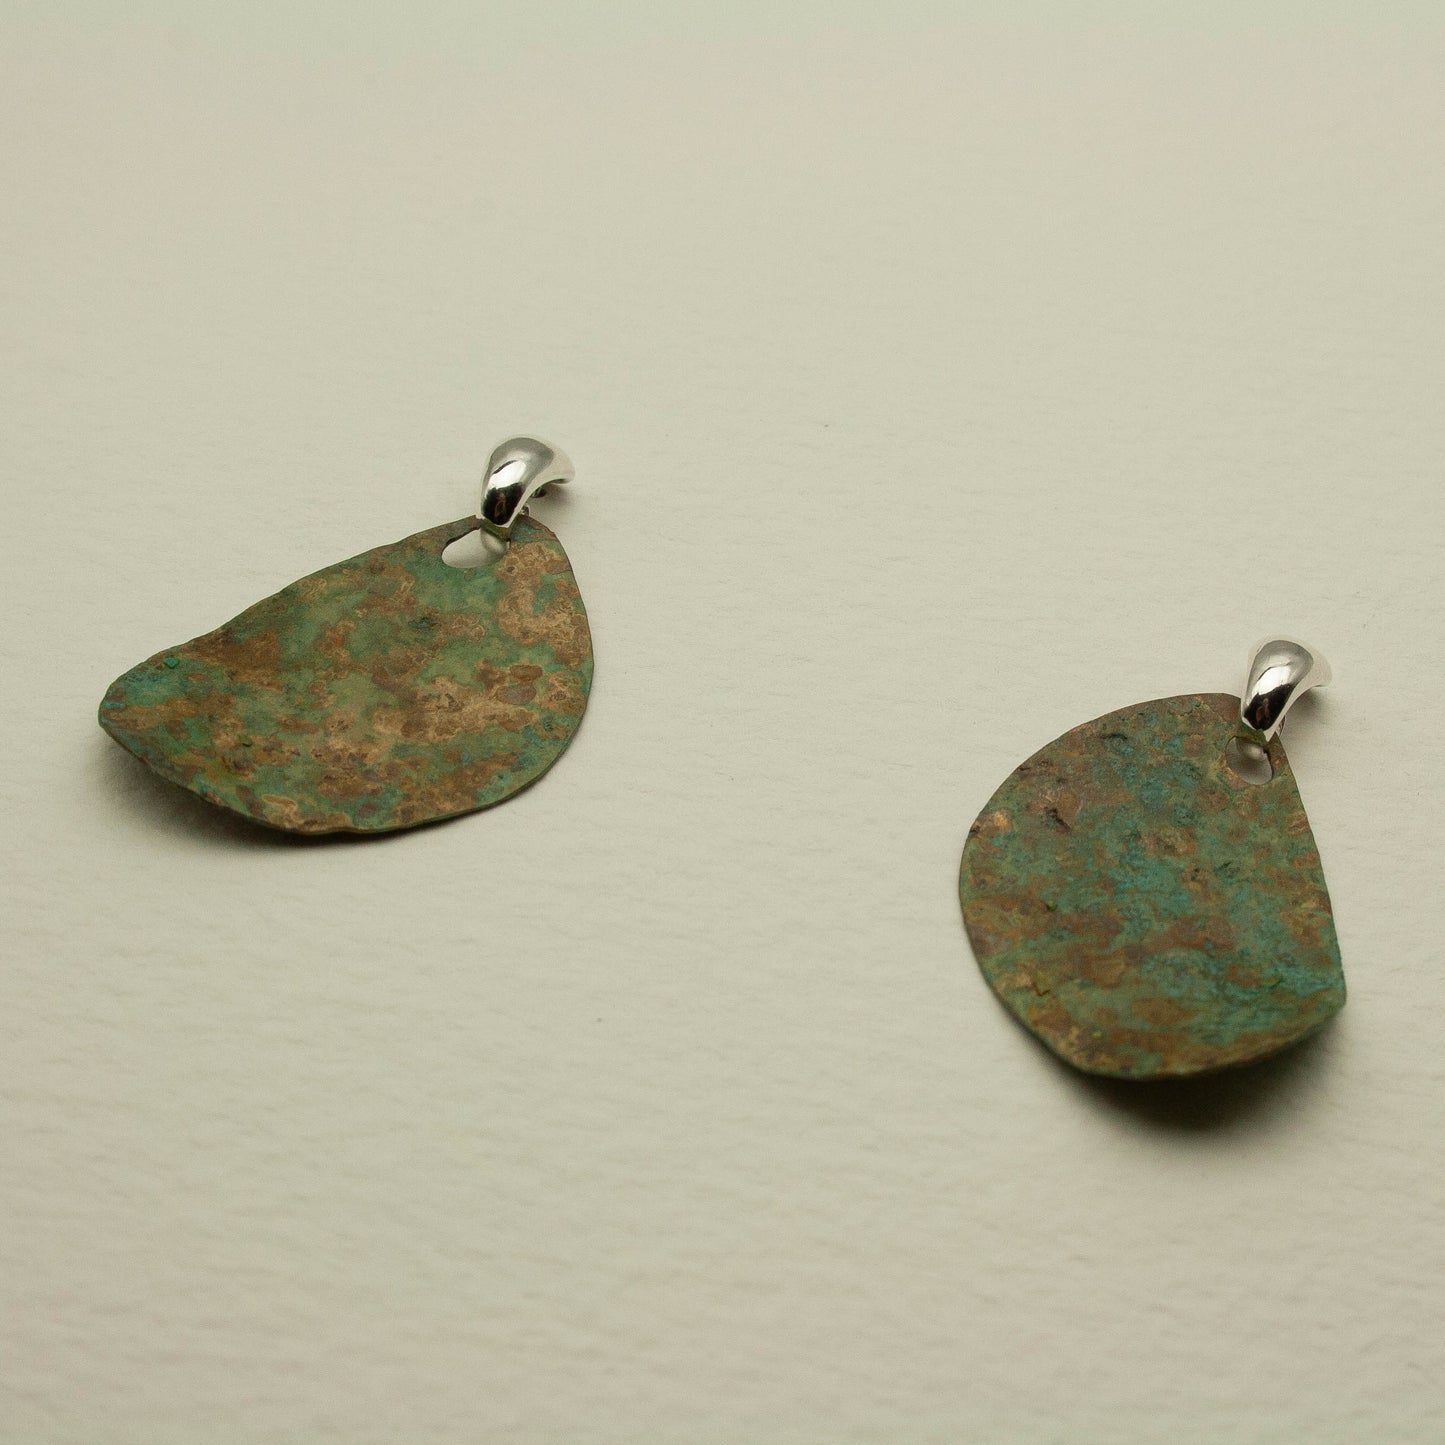 PATINA EARRINGS interchangeable with silver finding / mix of Patina and Paint 7